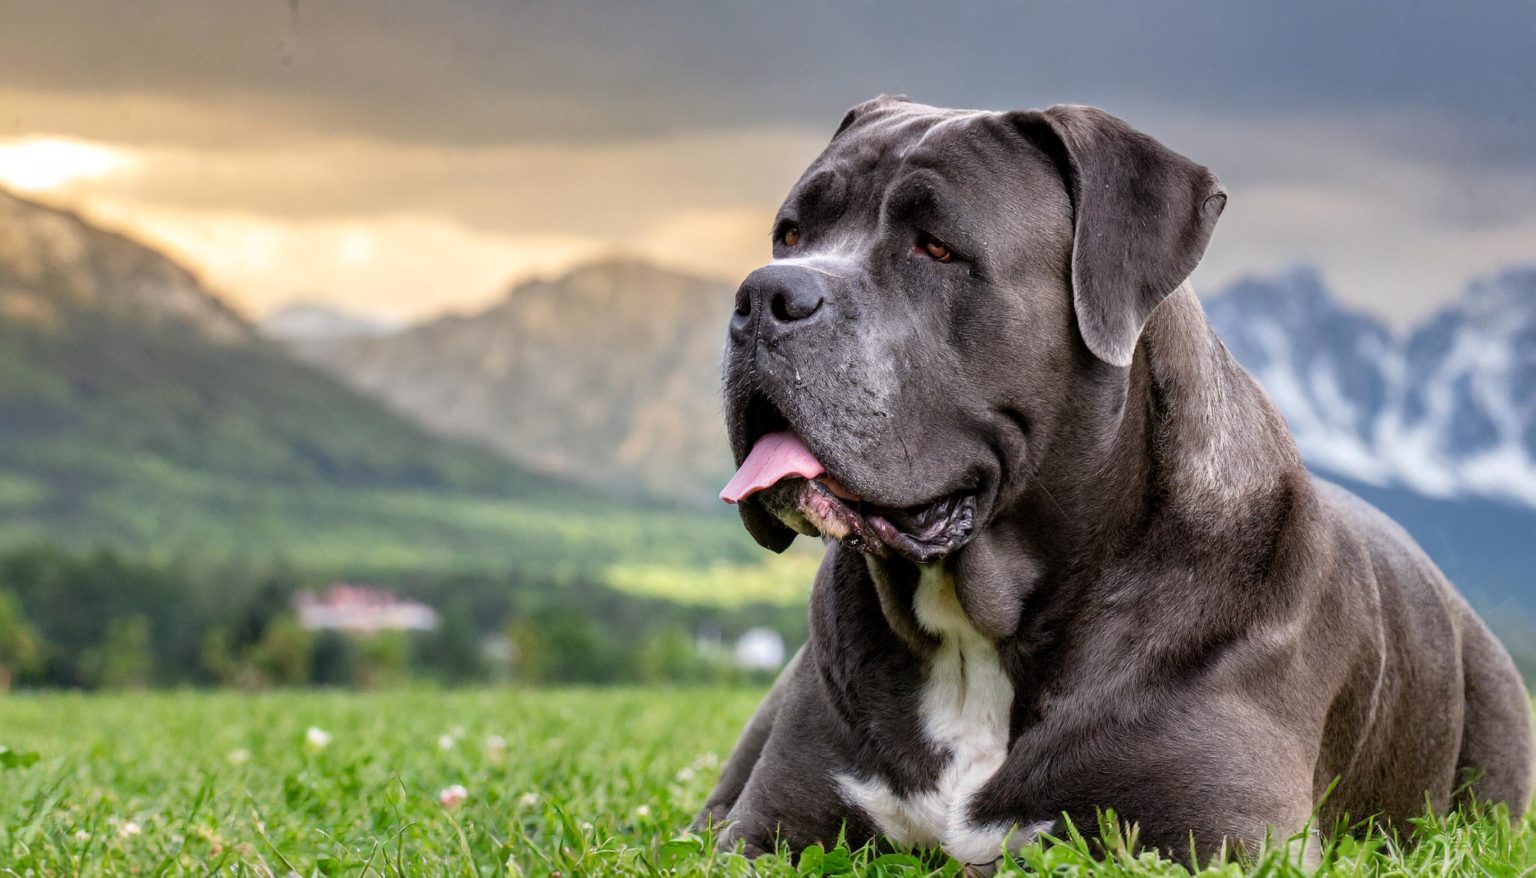 The cane corso's history goes back to ancient Rome, and beyond. Most experts believe they're descended from the now-extinct Greek Molossus dogs